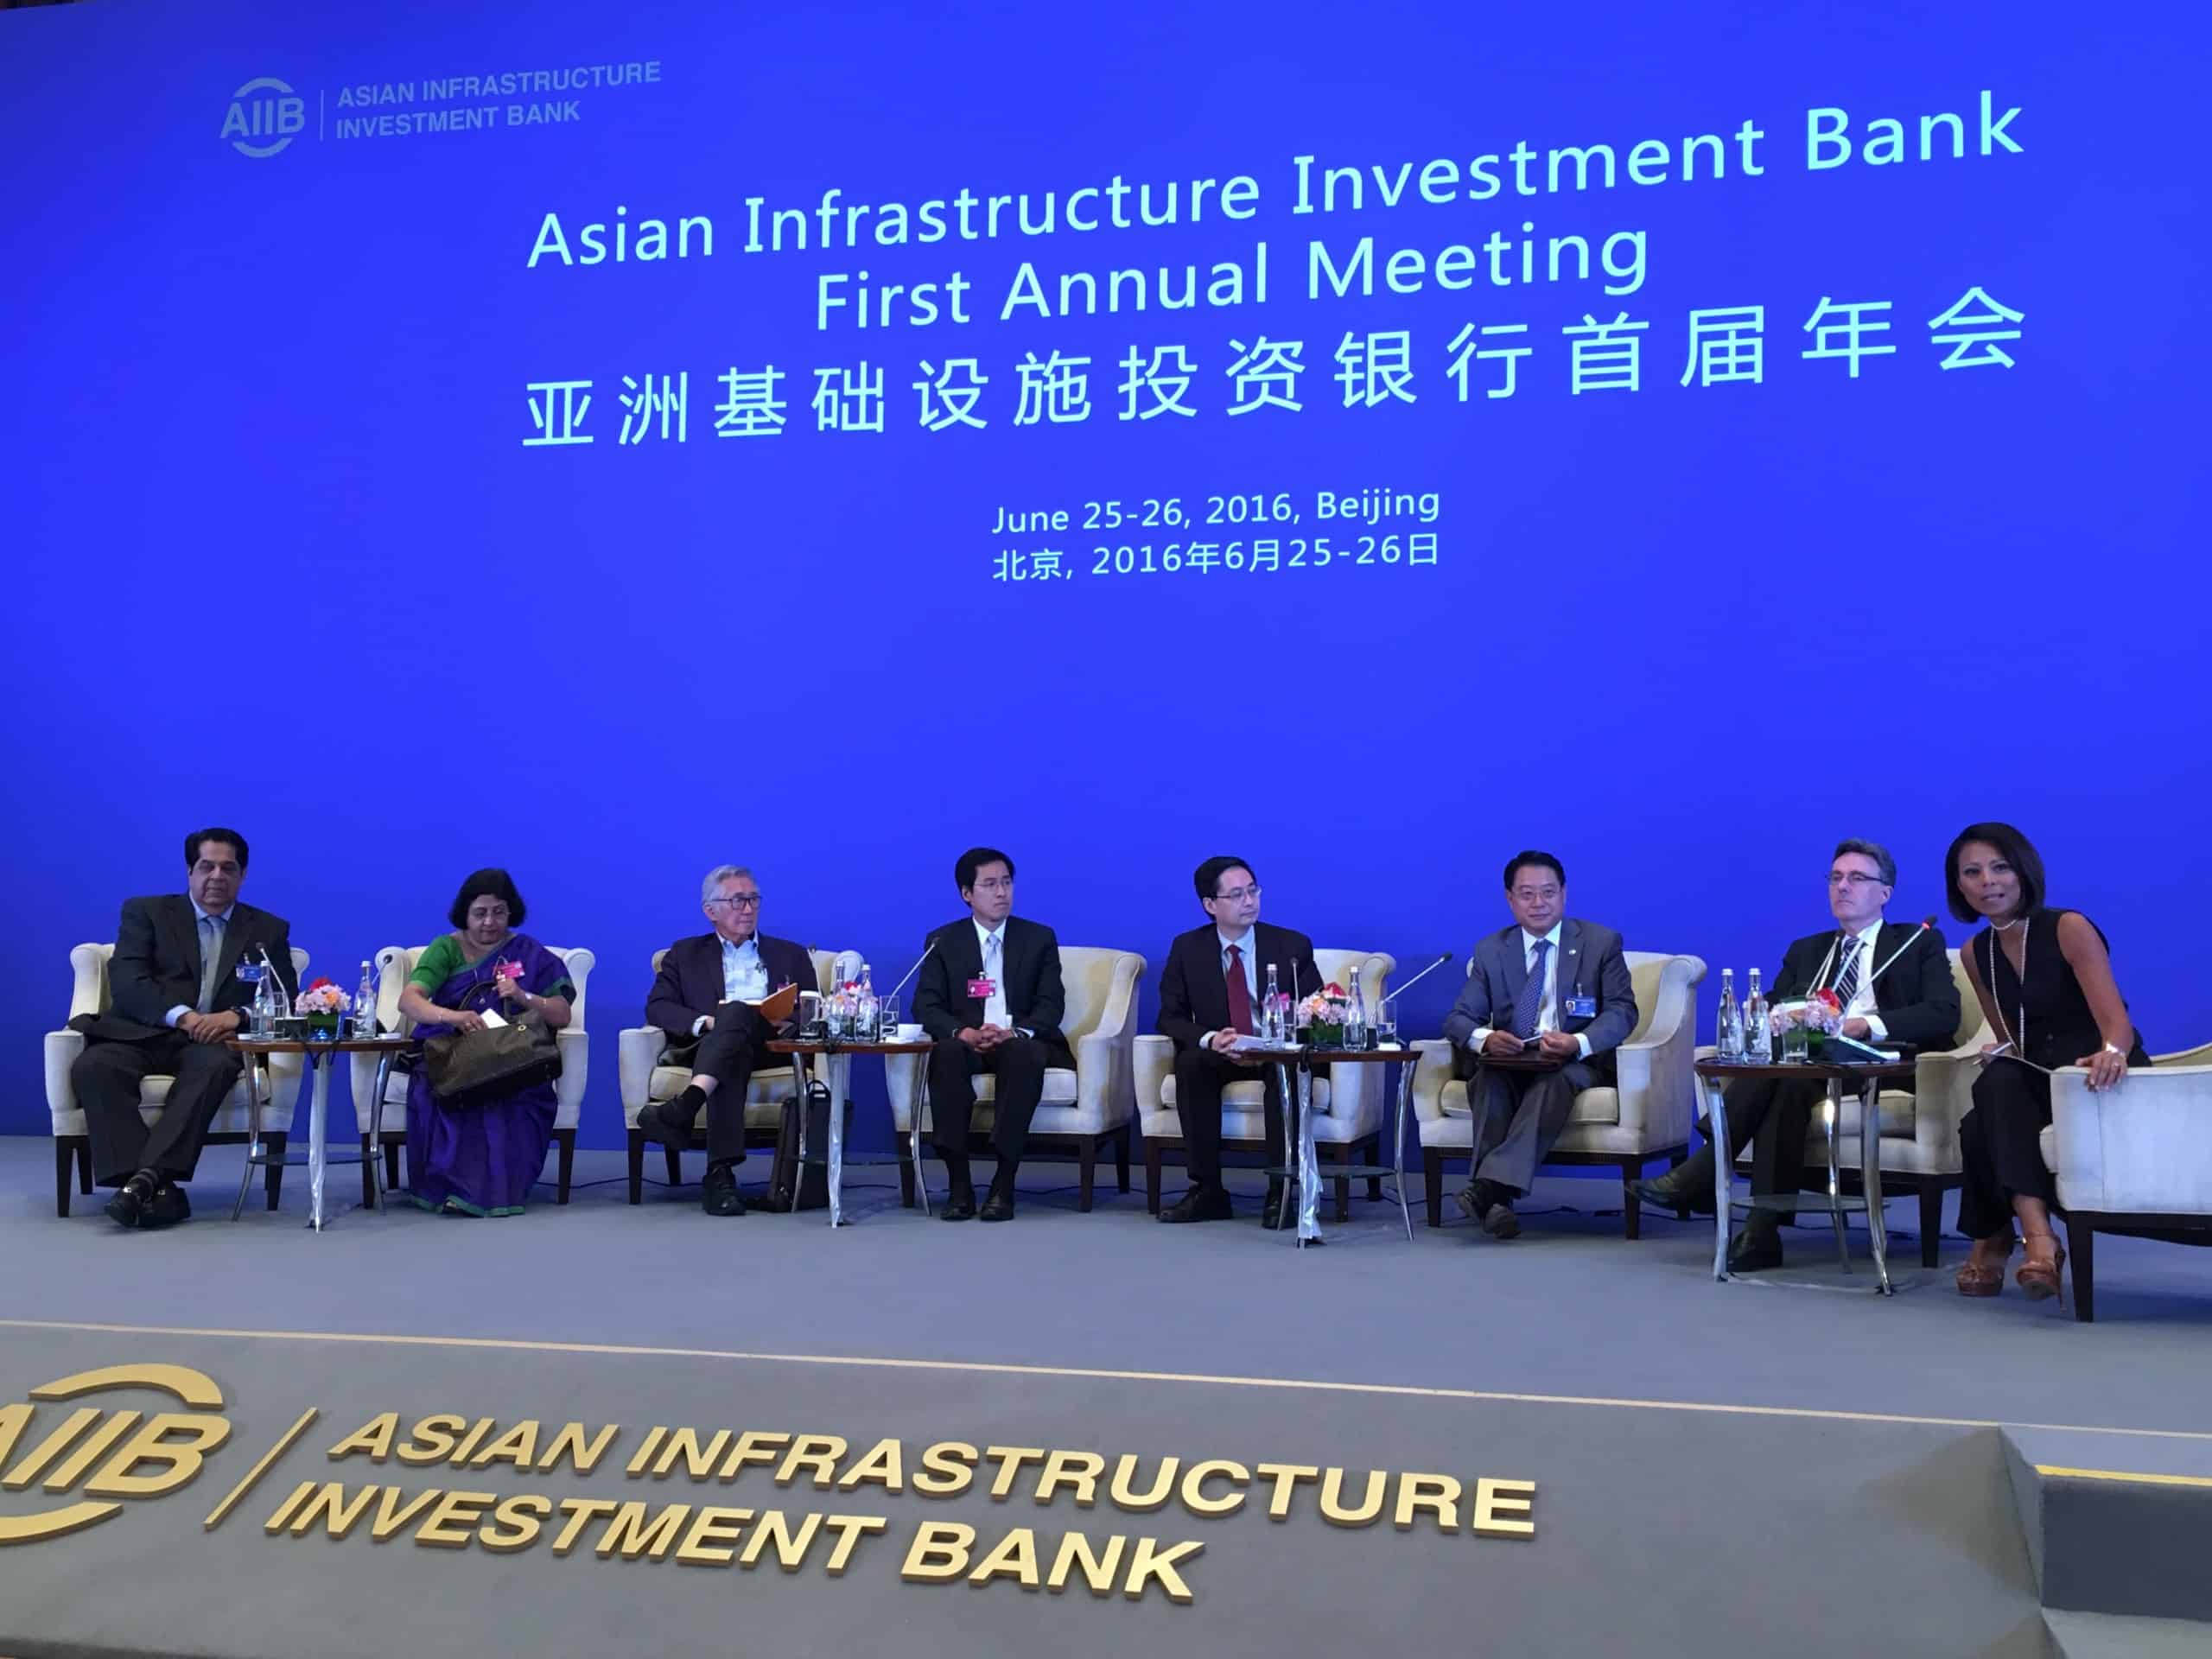 The Asian Infrastructure Investment Bank First Annual Meeting in Beijing, June 2016.